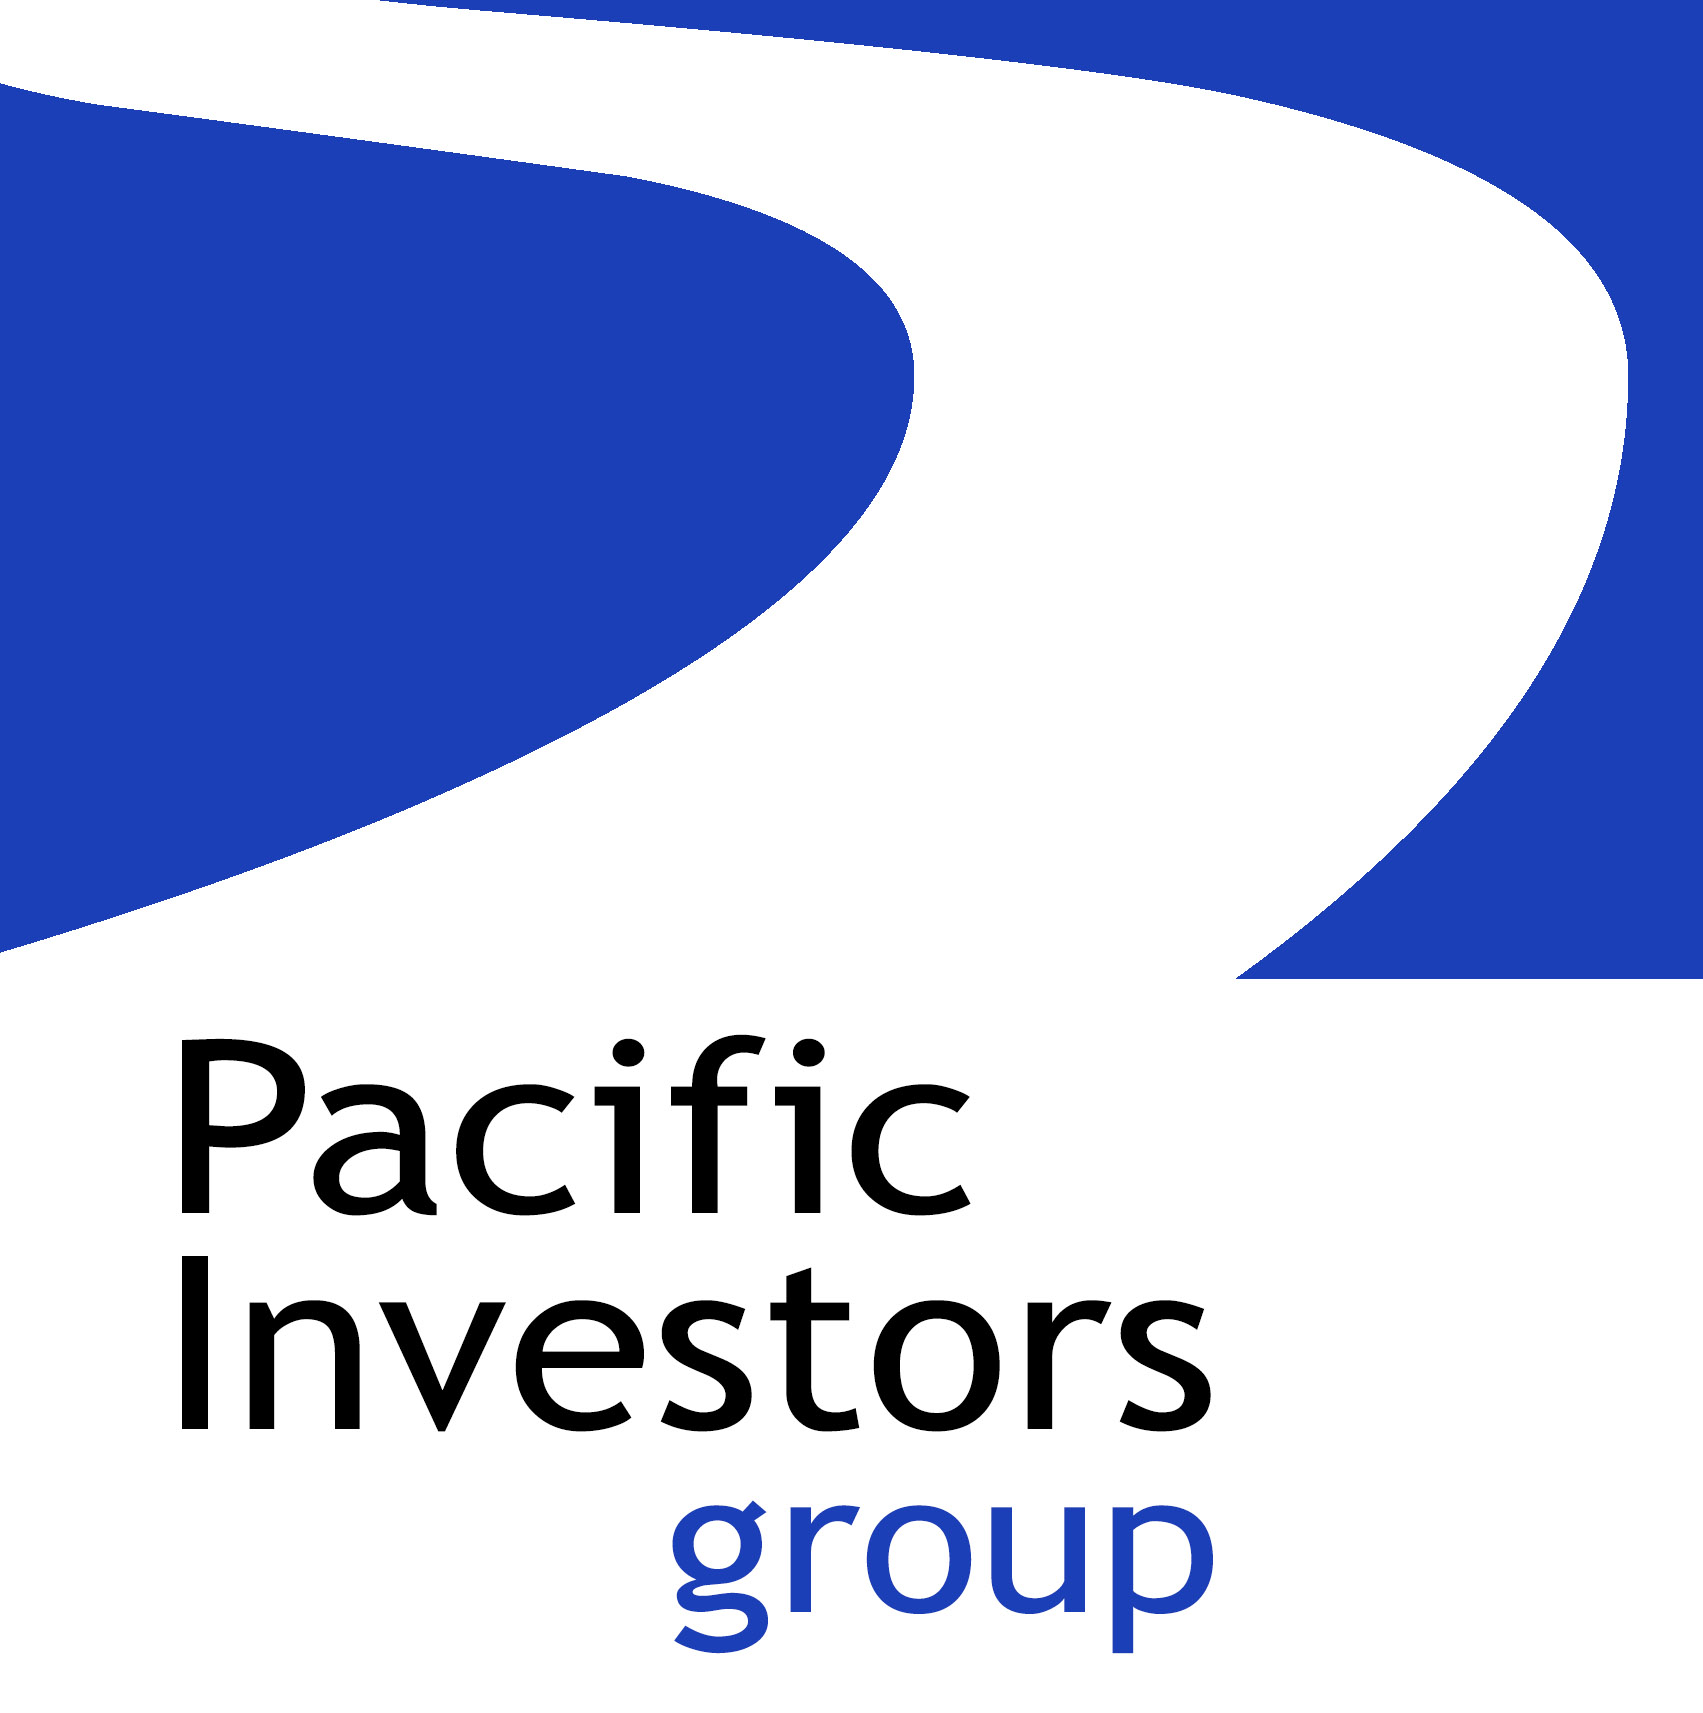 Pacific Investors Group